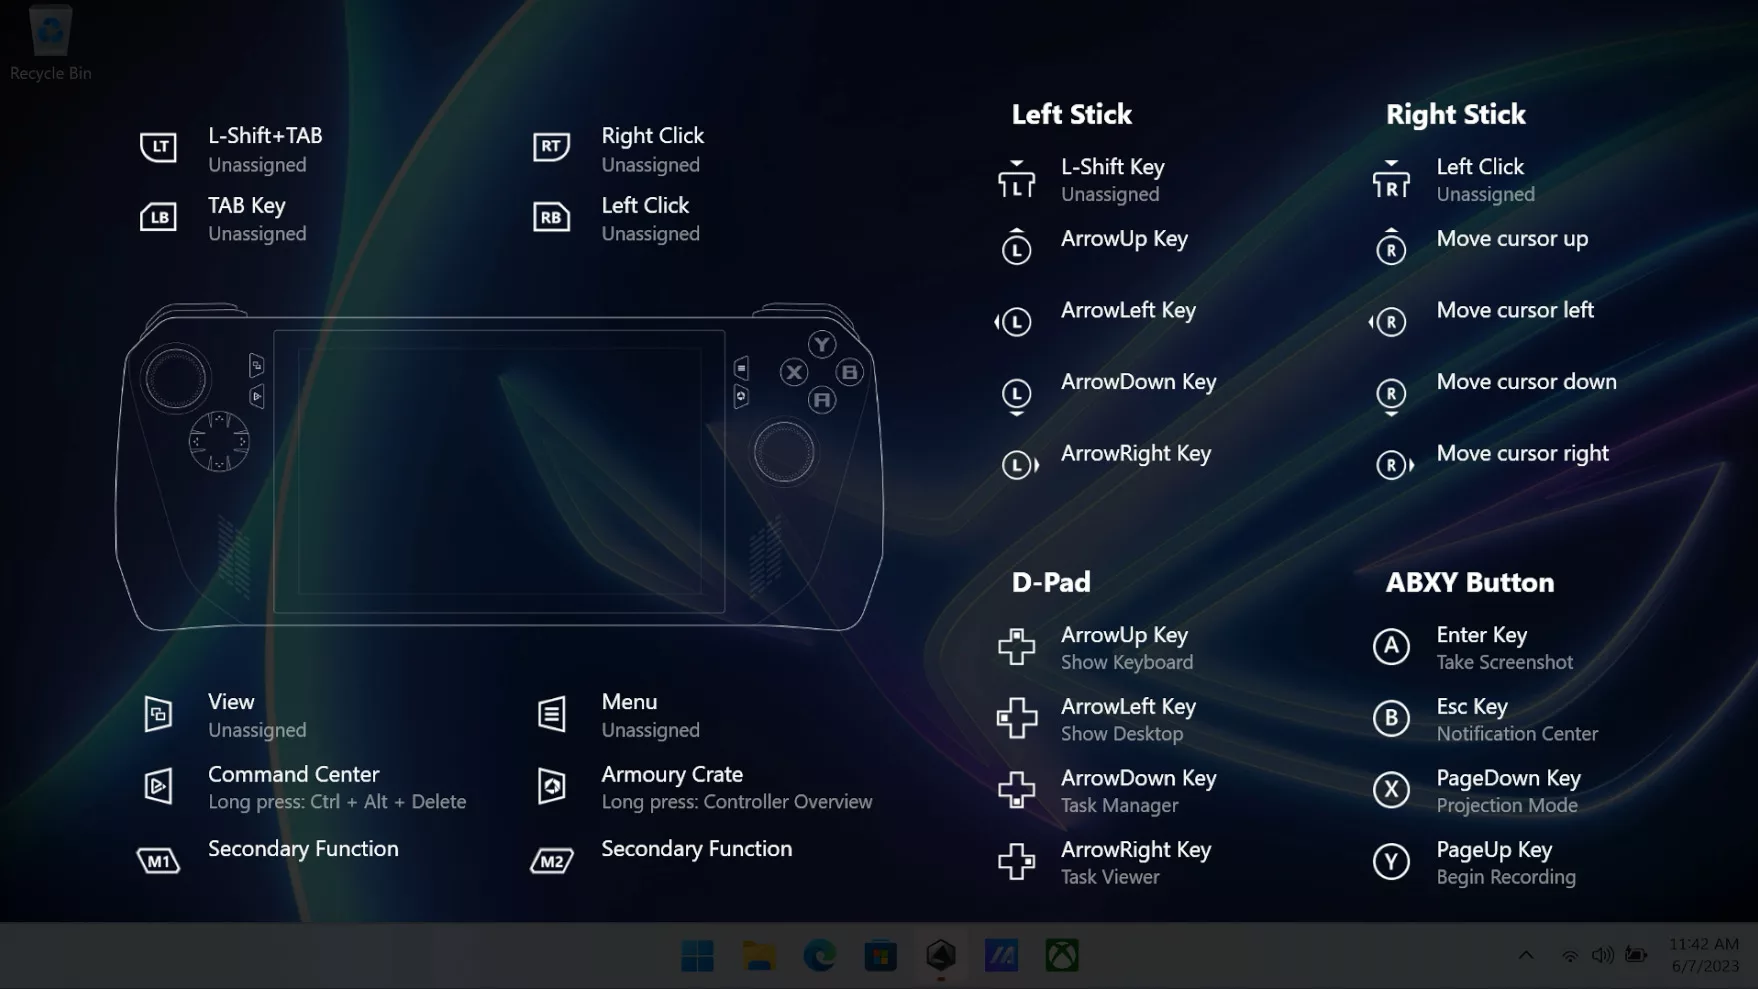 A screenshot showing all of the ROG Ally's default button mappings.